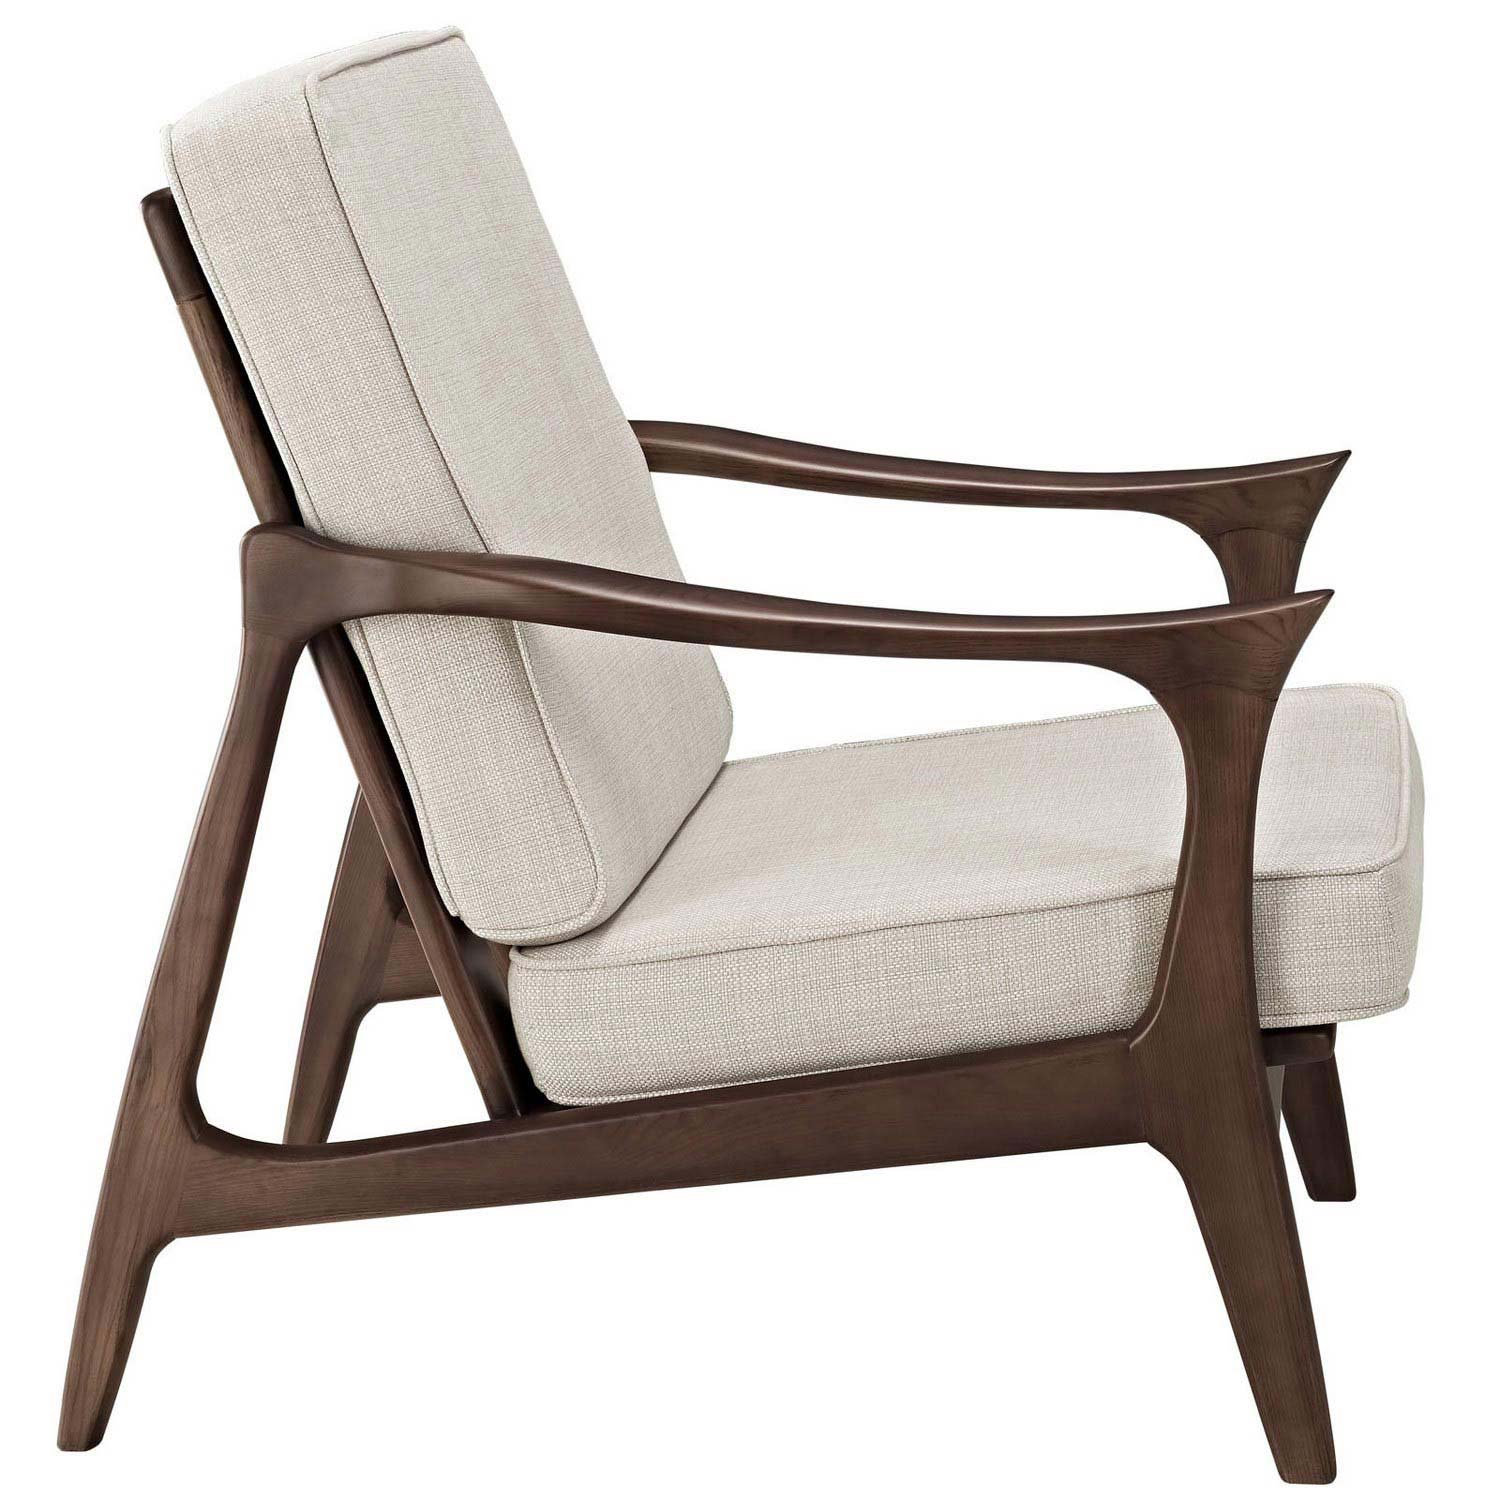 Modway Canoe Lounge Chair - Brown